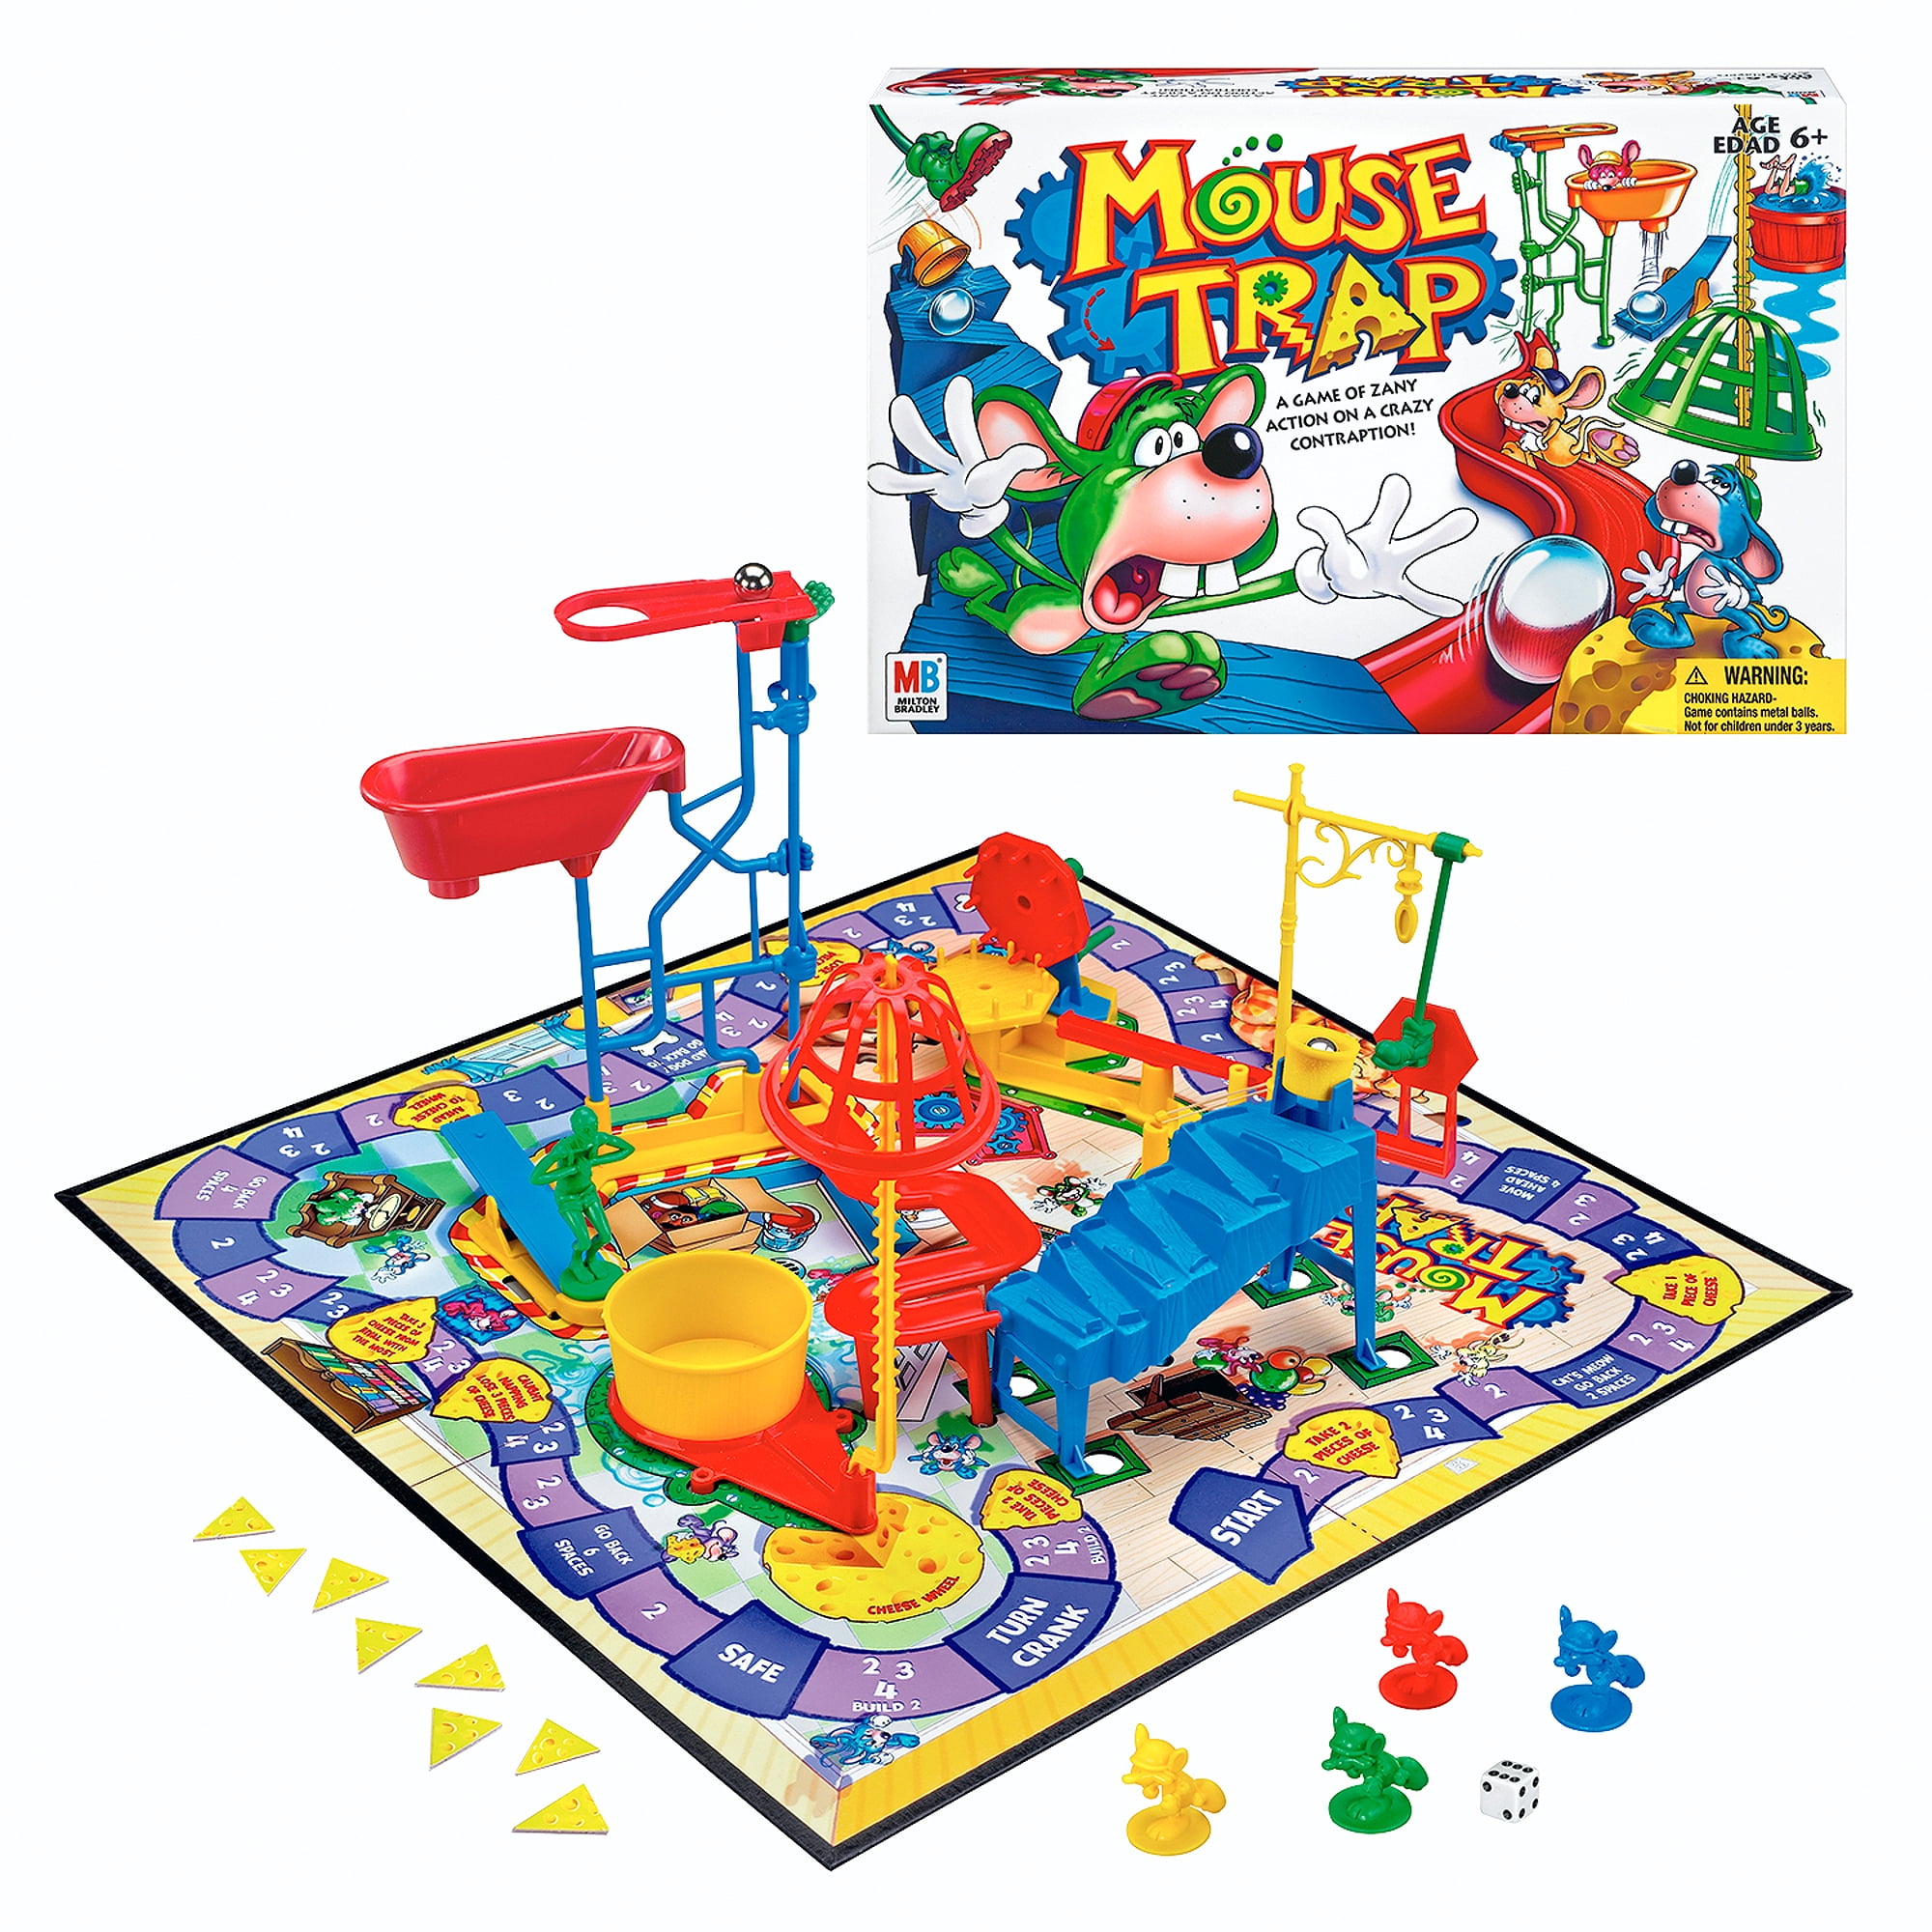 VINTAGE 1994 MOUSE TRAP A GAME OF ZANY ACTION ON A CRAZY CONTRAPTION  MB GAMES 